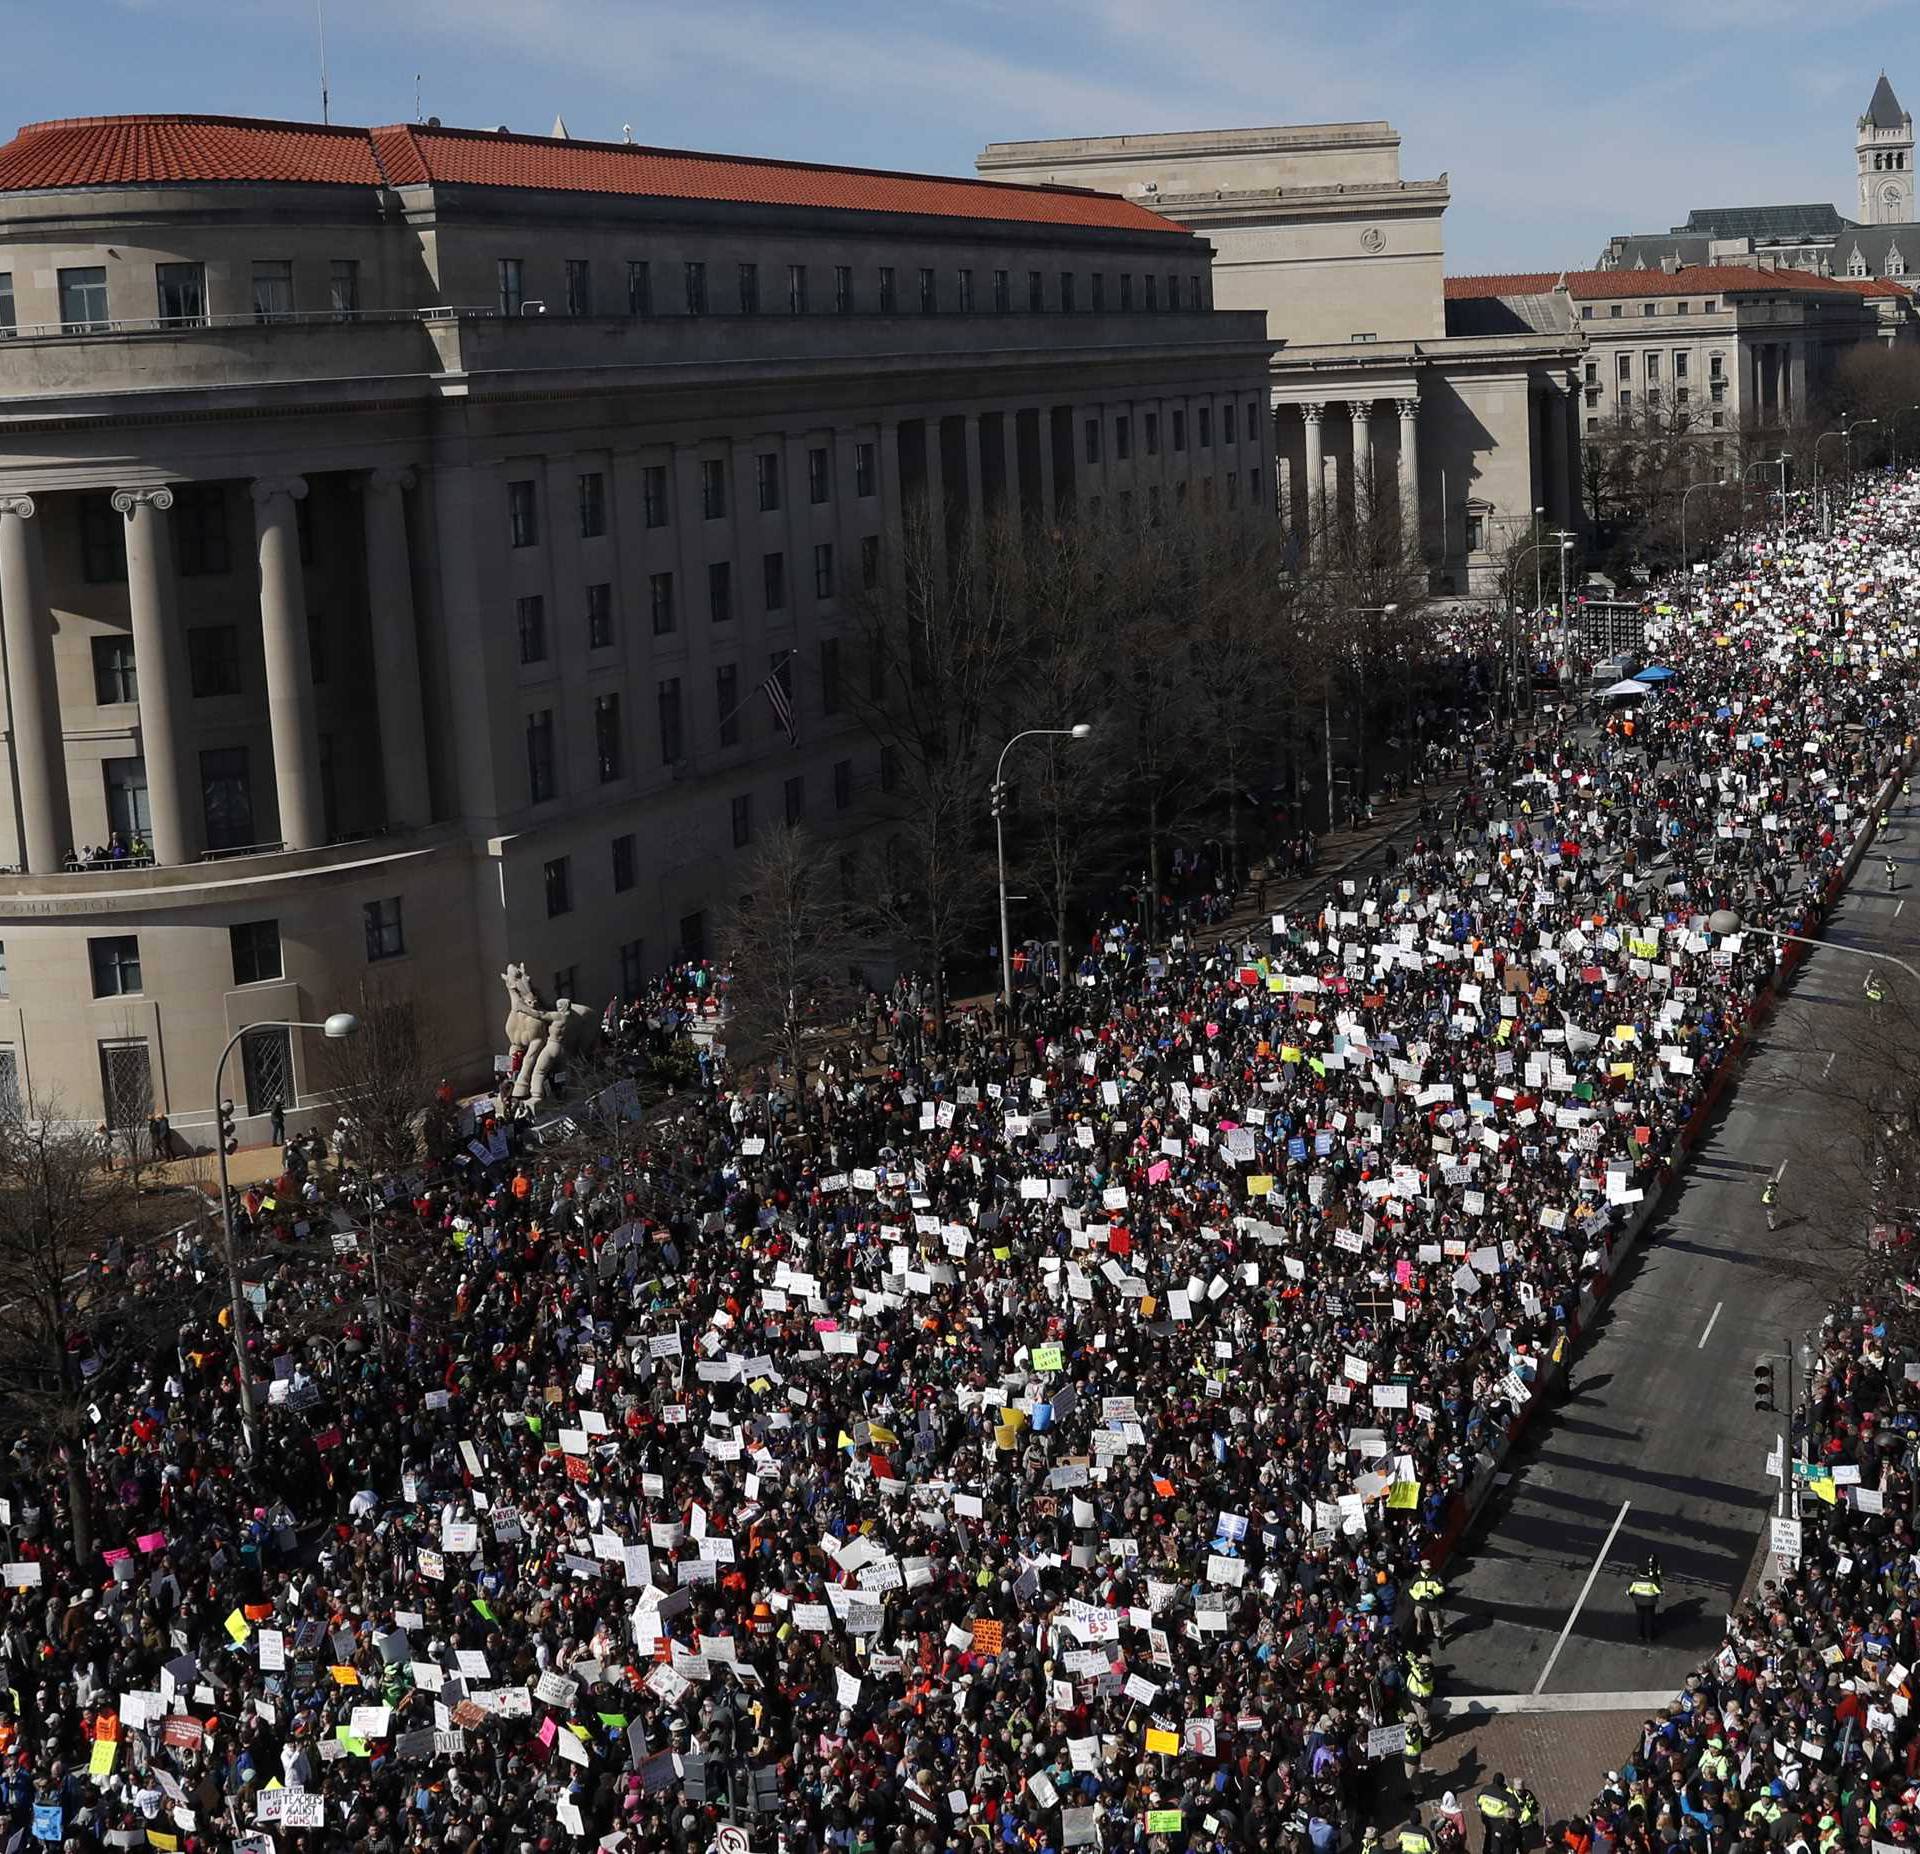 Students and young people gather for the "March for Our Lives" rally demanding gun control in Washington